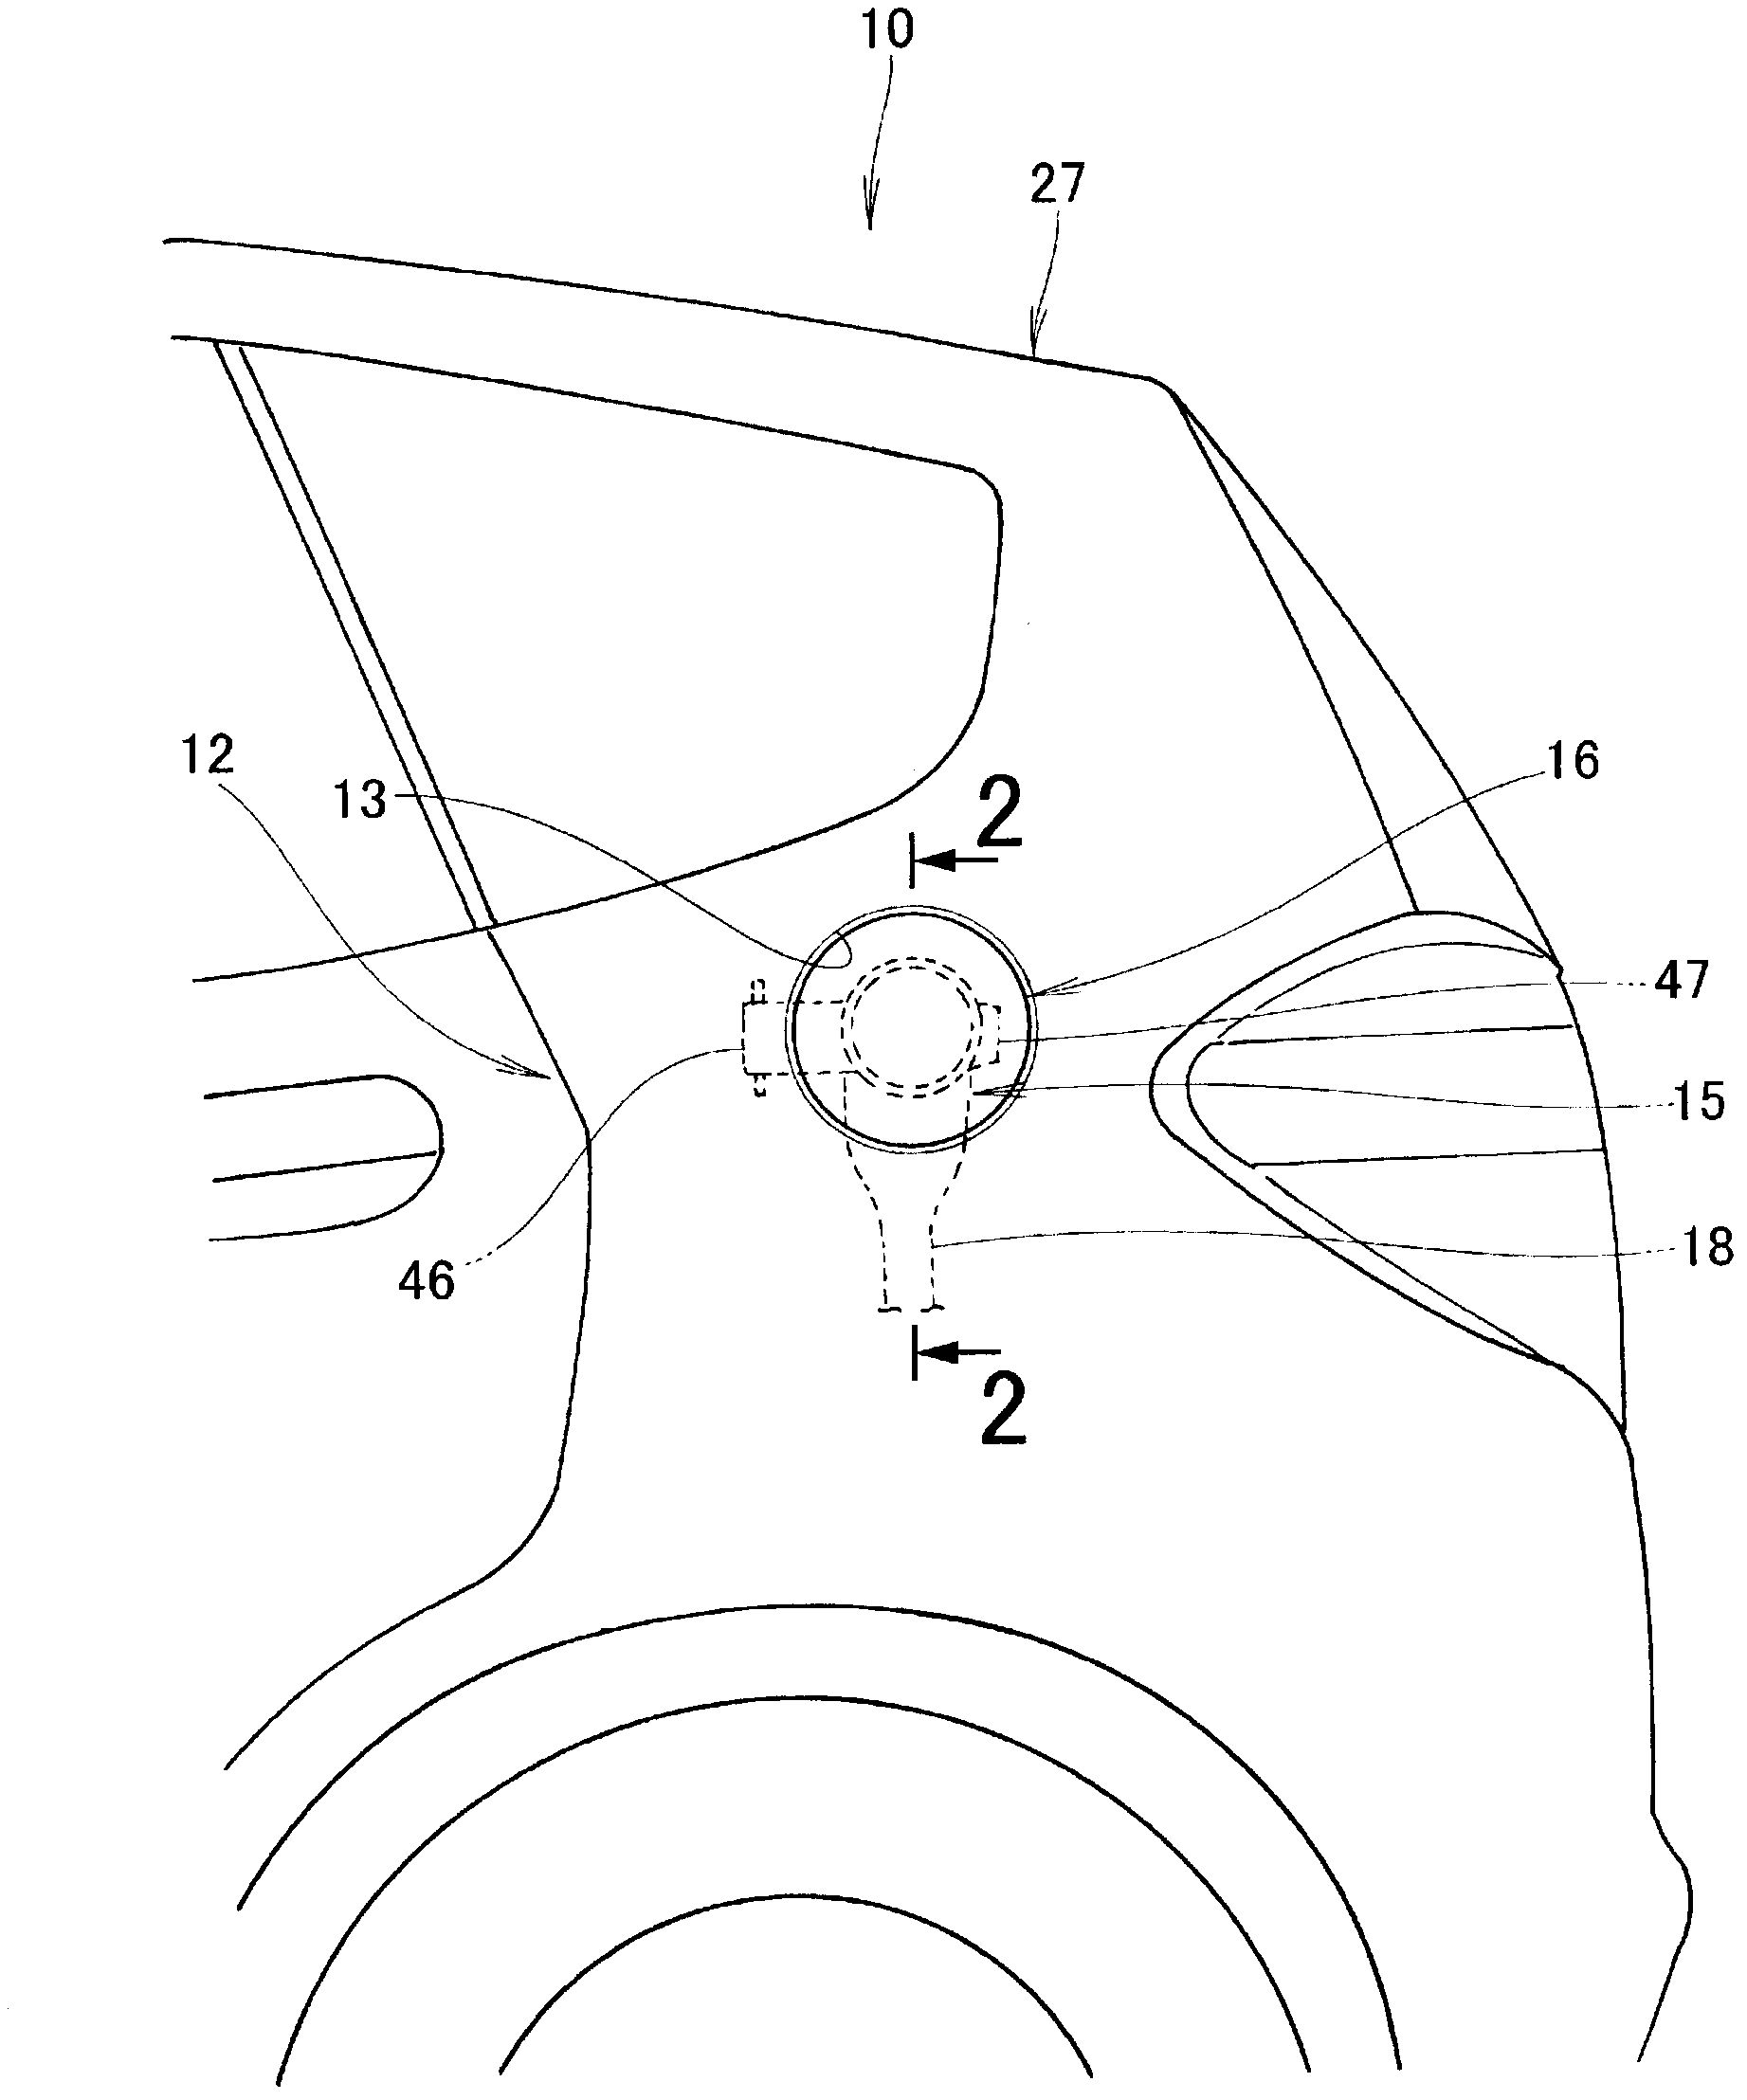 Structure for fuel filler tube opening